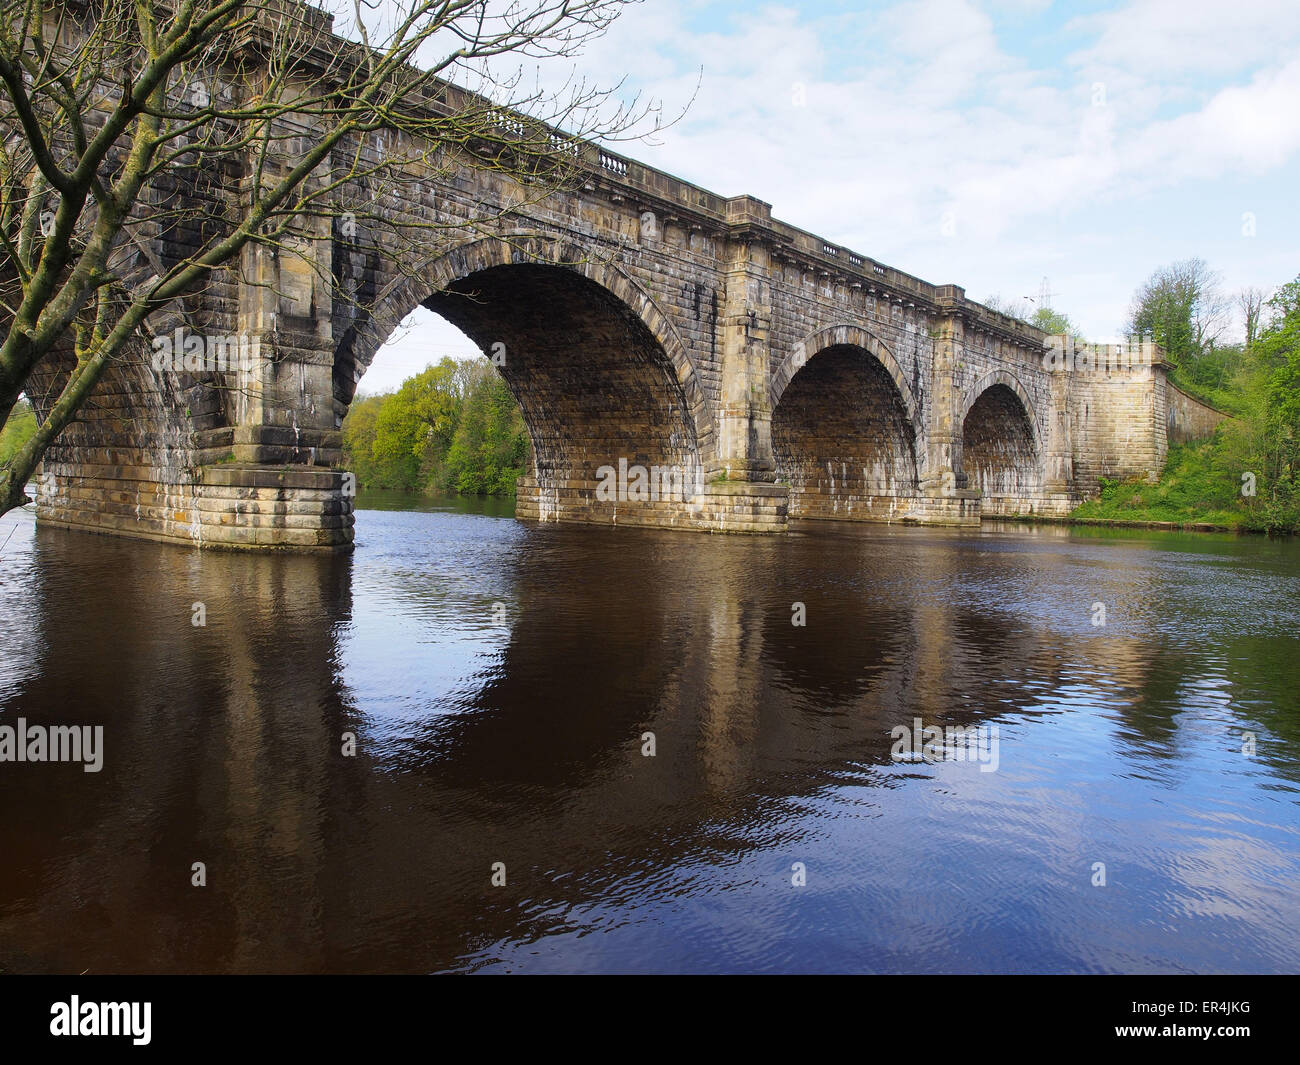 The Lune Aqueduct, built to carry the Lancaster Canal over the River Lune near Lancaster, England. Stock Photo